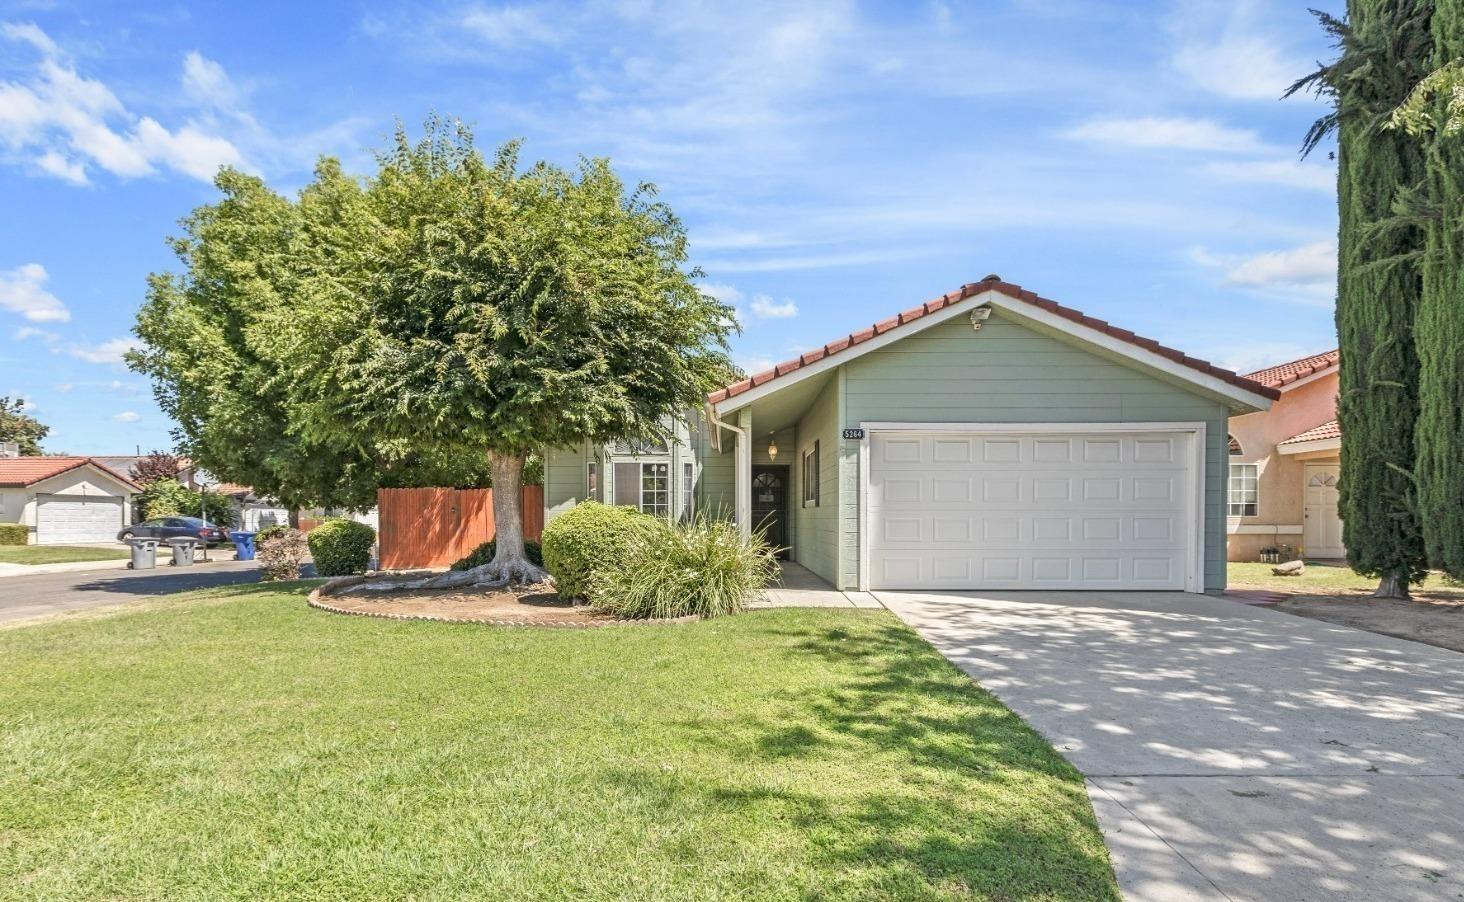 Photo of 5264 W Fremont Ave in Fresno, CA